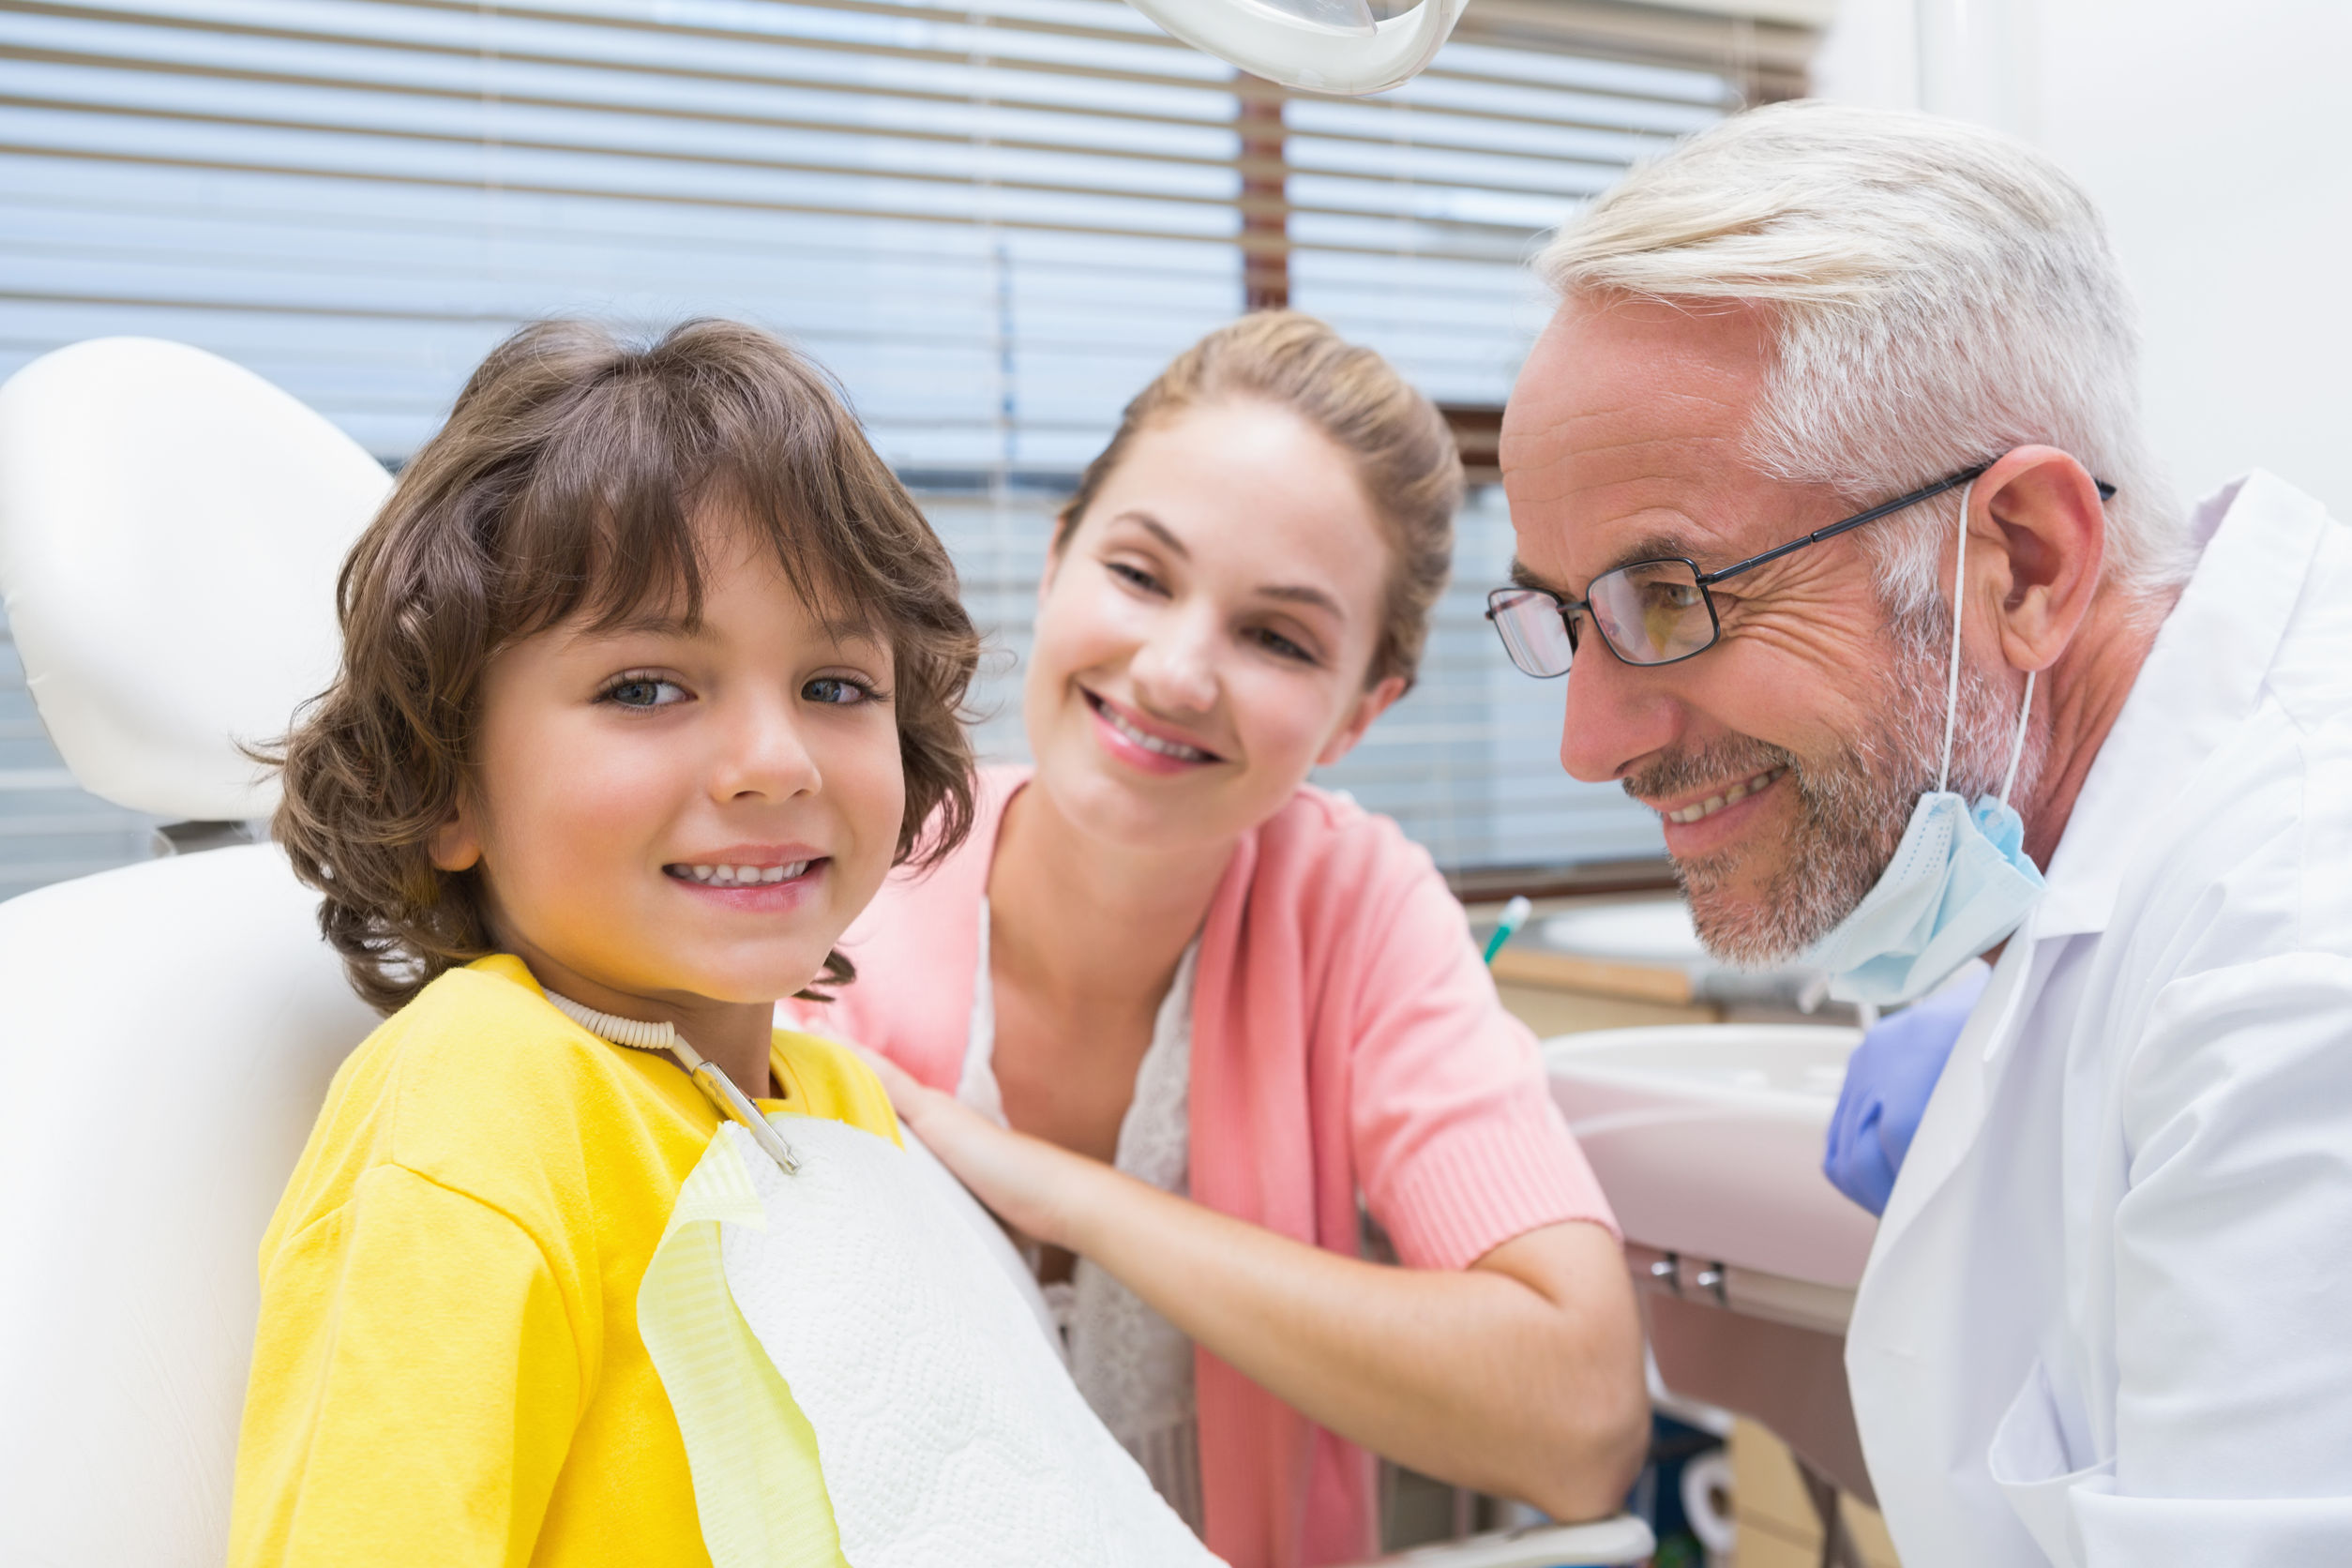 Where can I find kids tooth decay Mendham treatment?